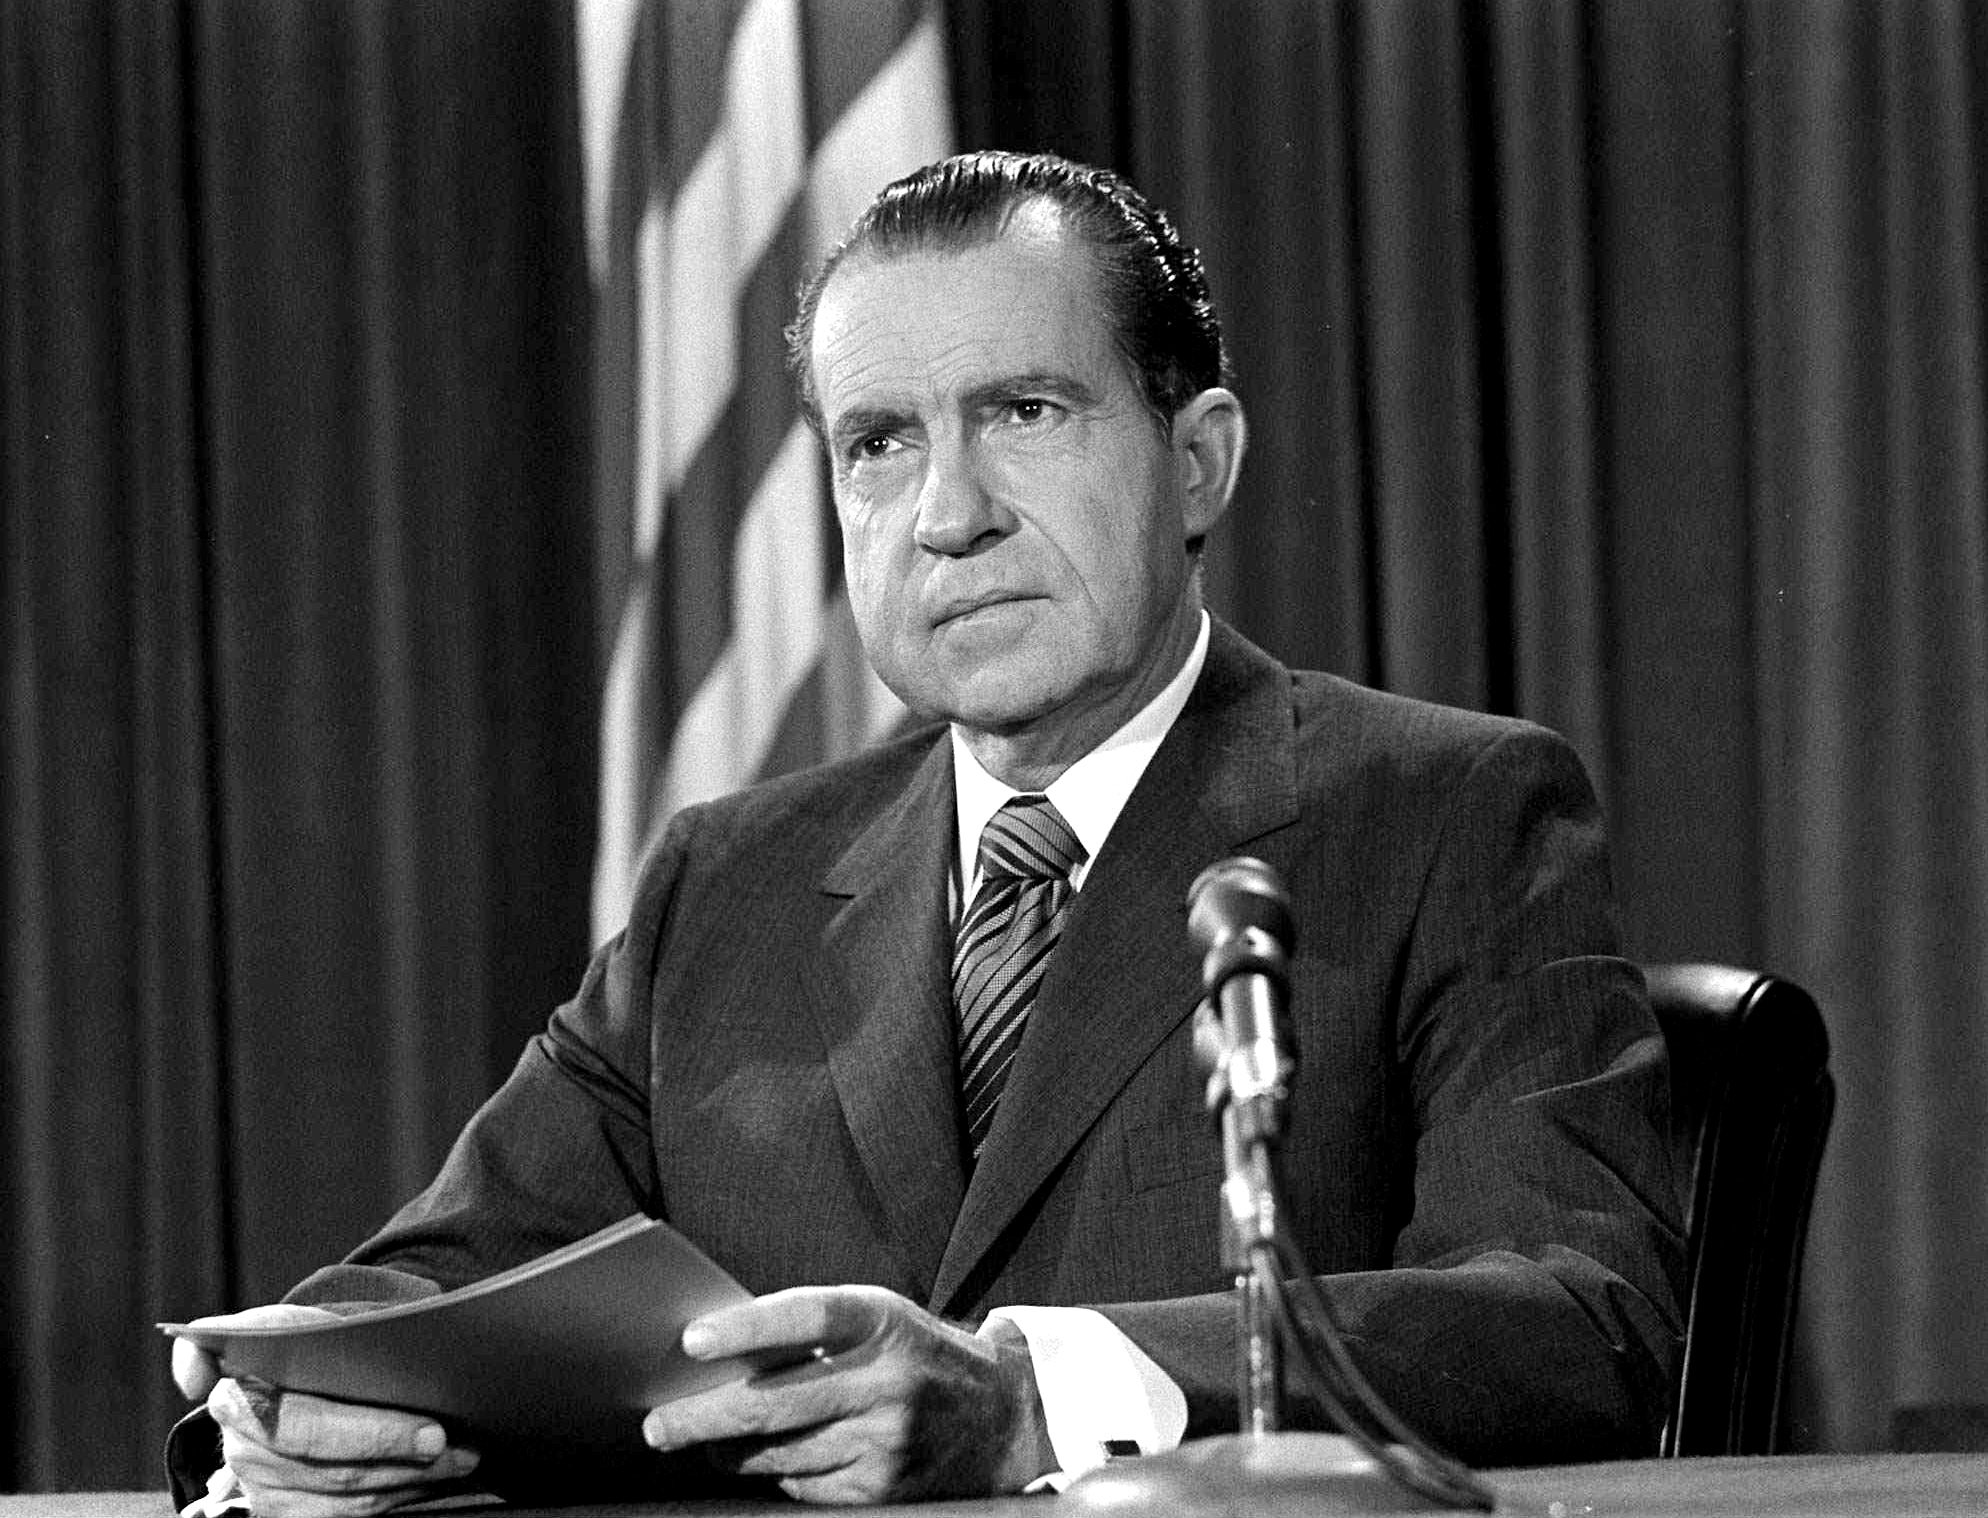 President Nixon poses at his White House desk in this March 23, 1970 file photo. (AP Photo)